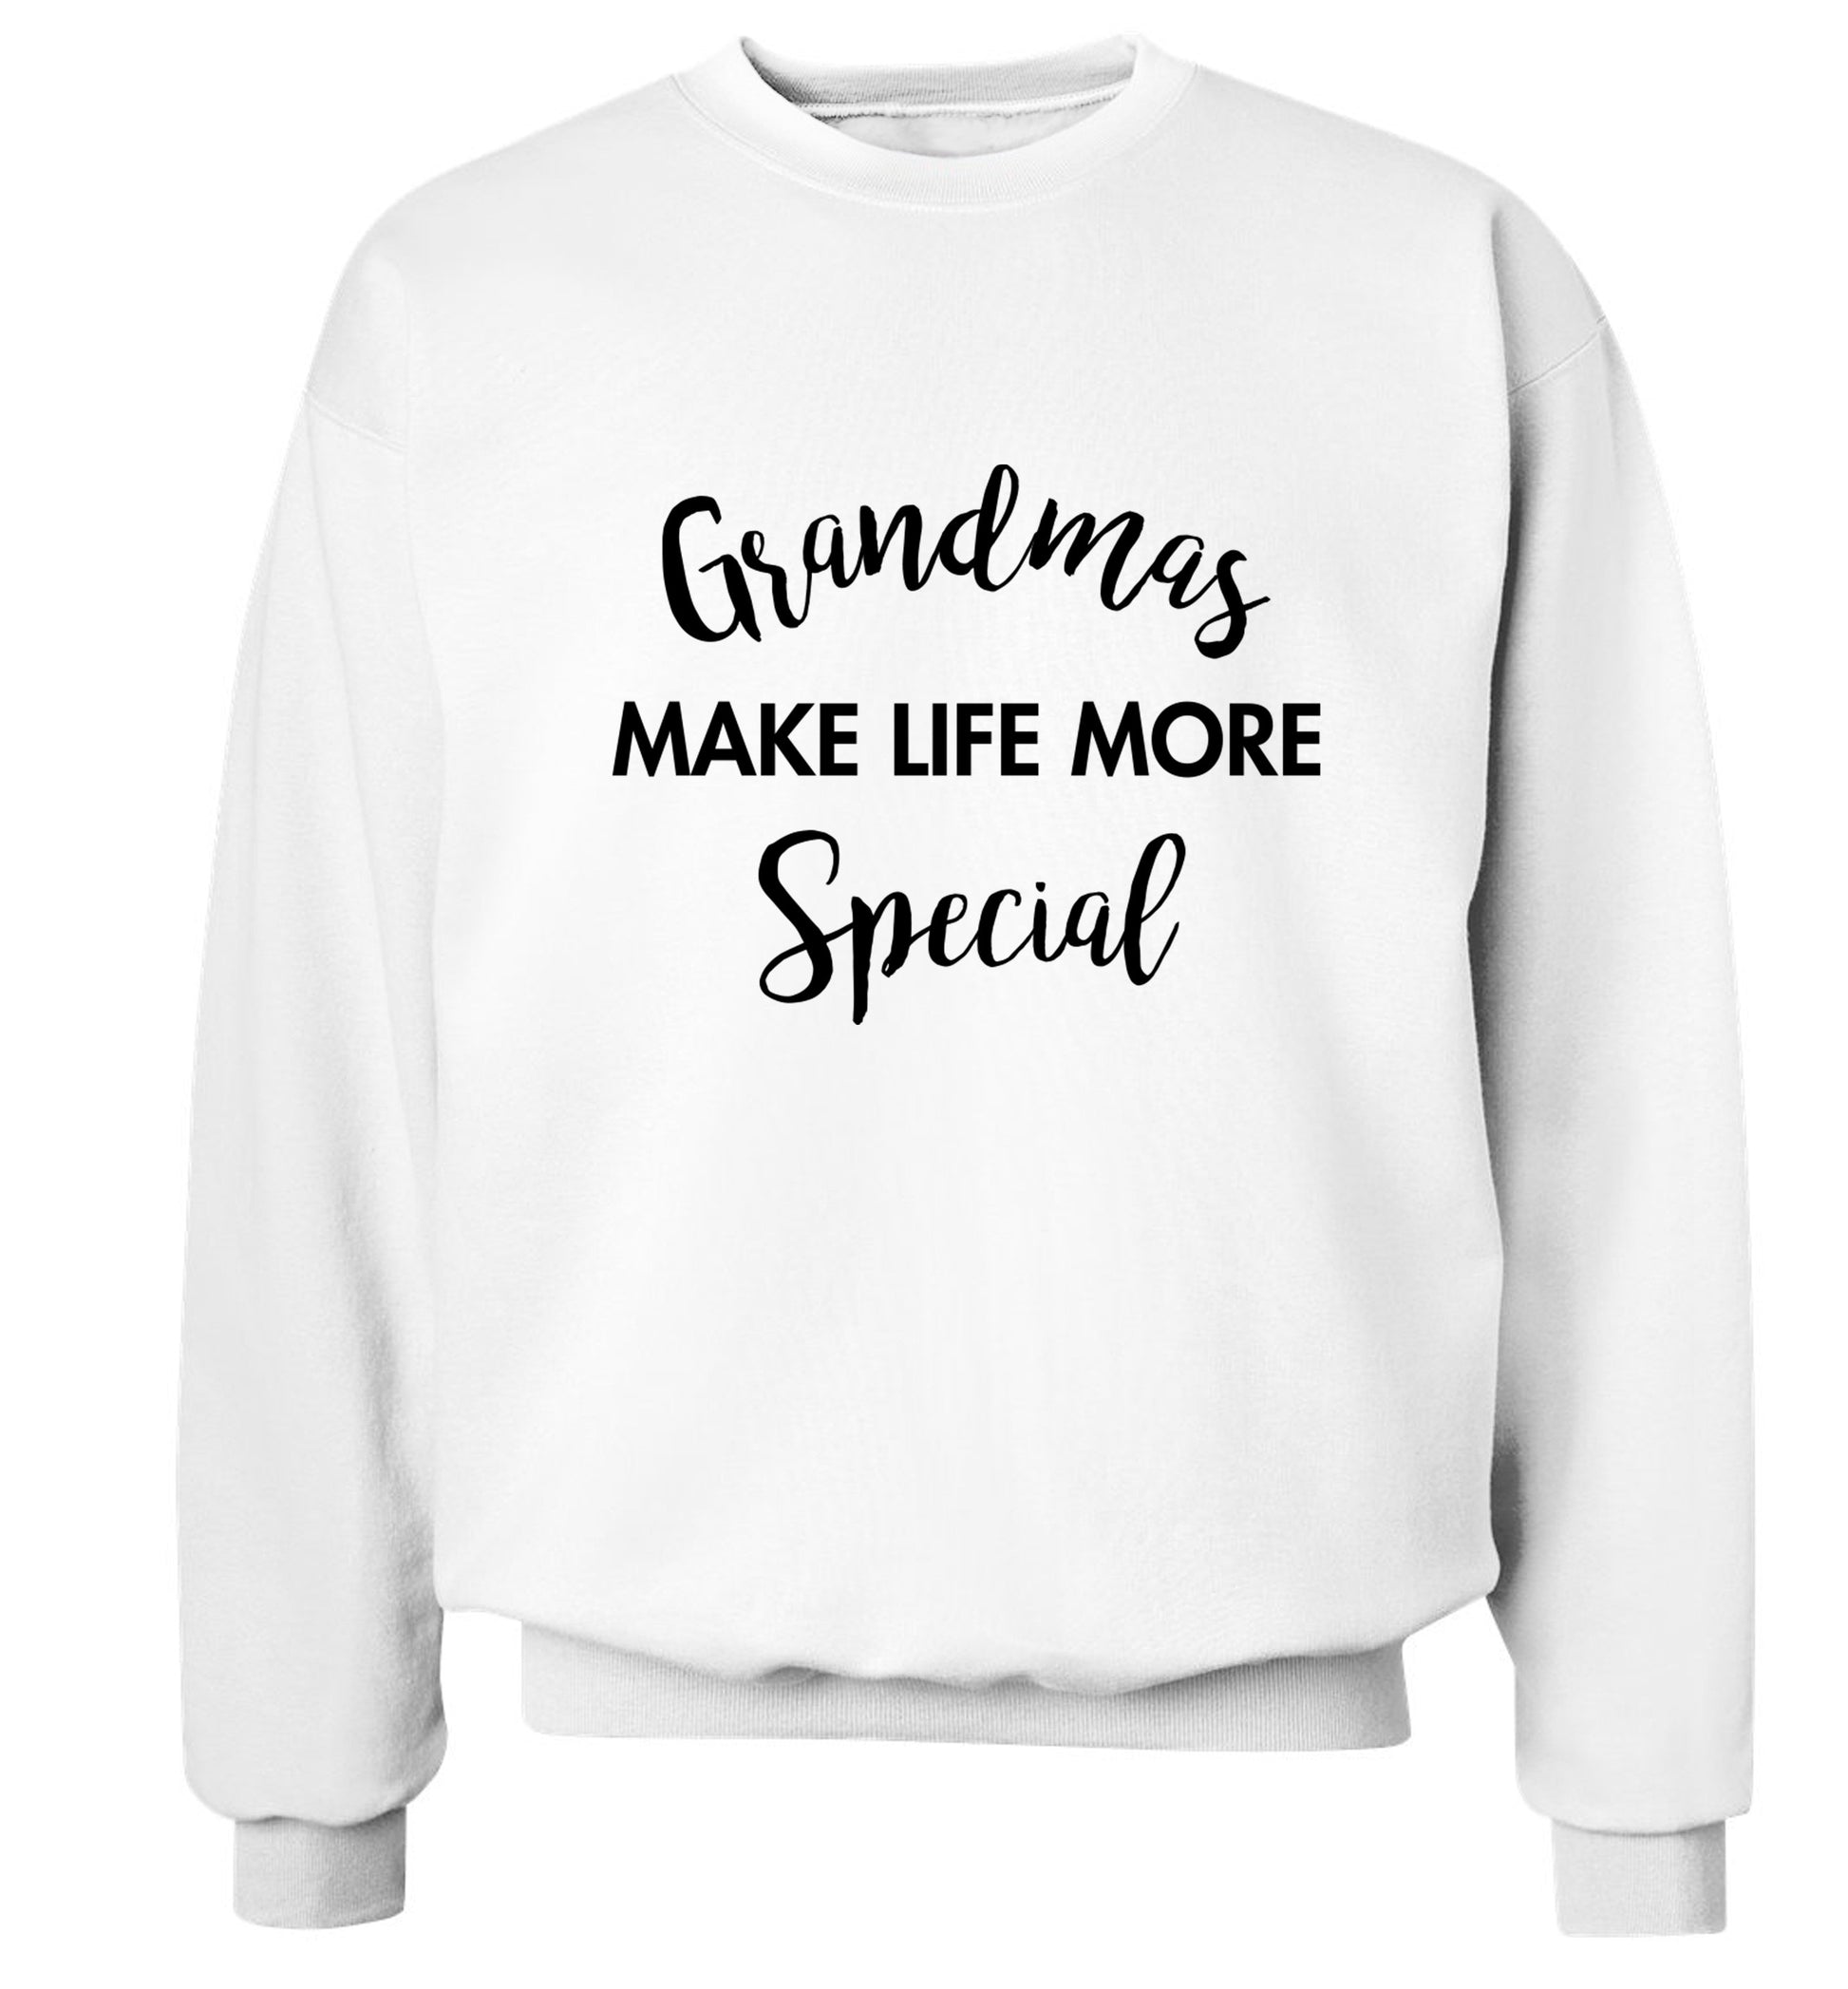 Grandmas make life more special Adult's unisex white Sweater 2XL